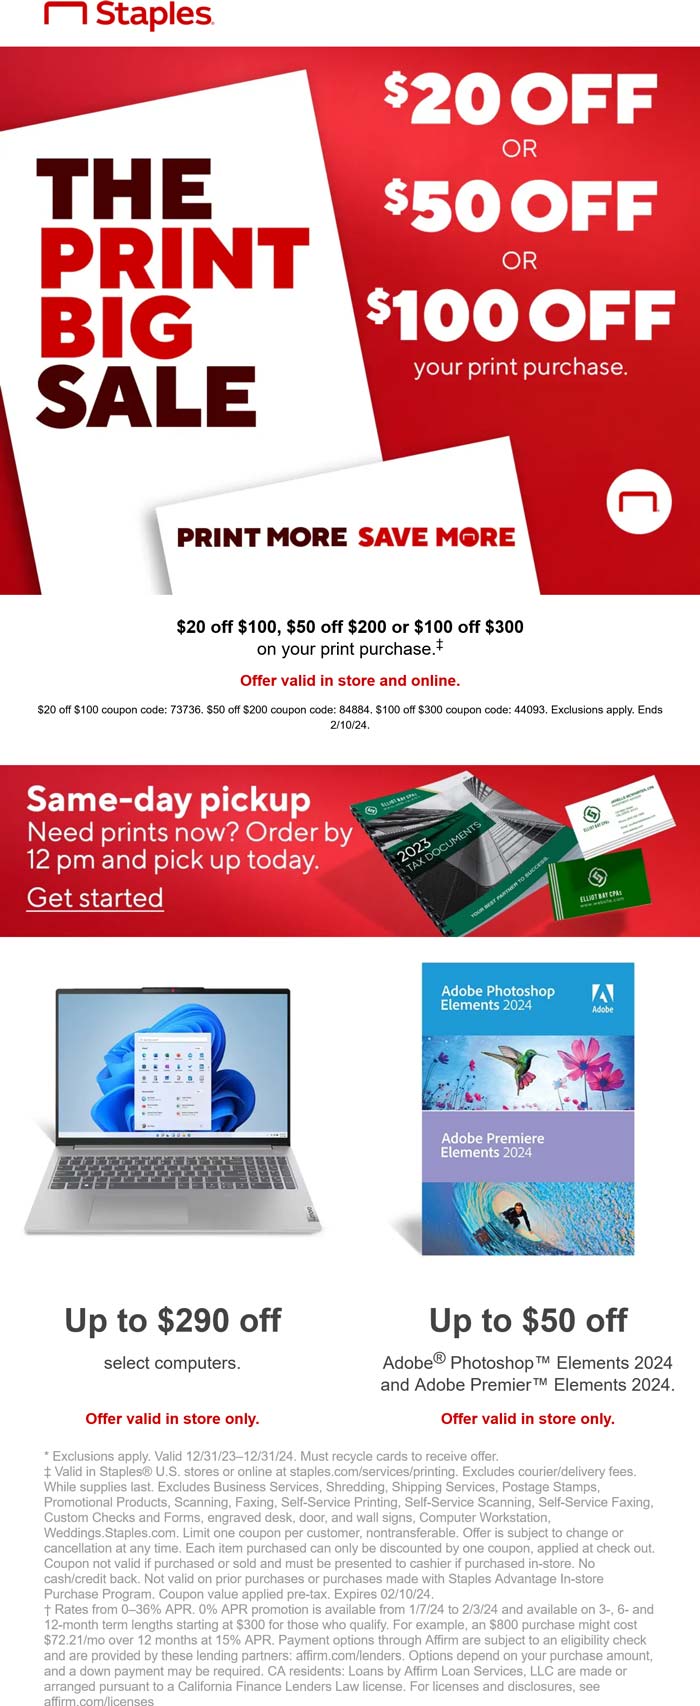 $20-$100 off $100+ on printing at Staples via promo code 73736 84884 or 44093 #staples